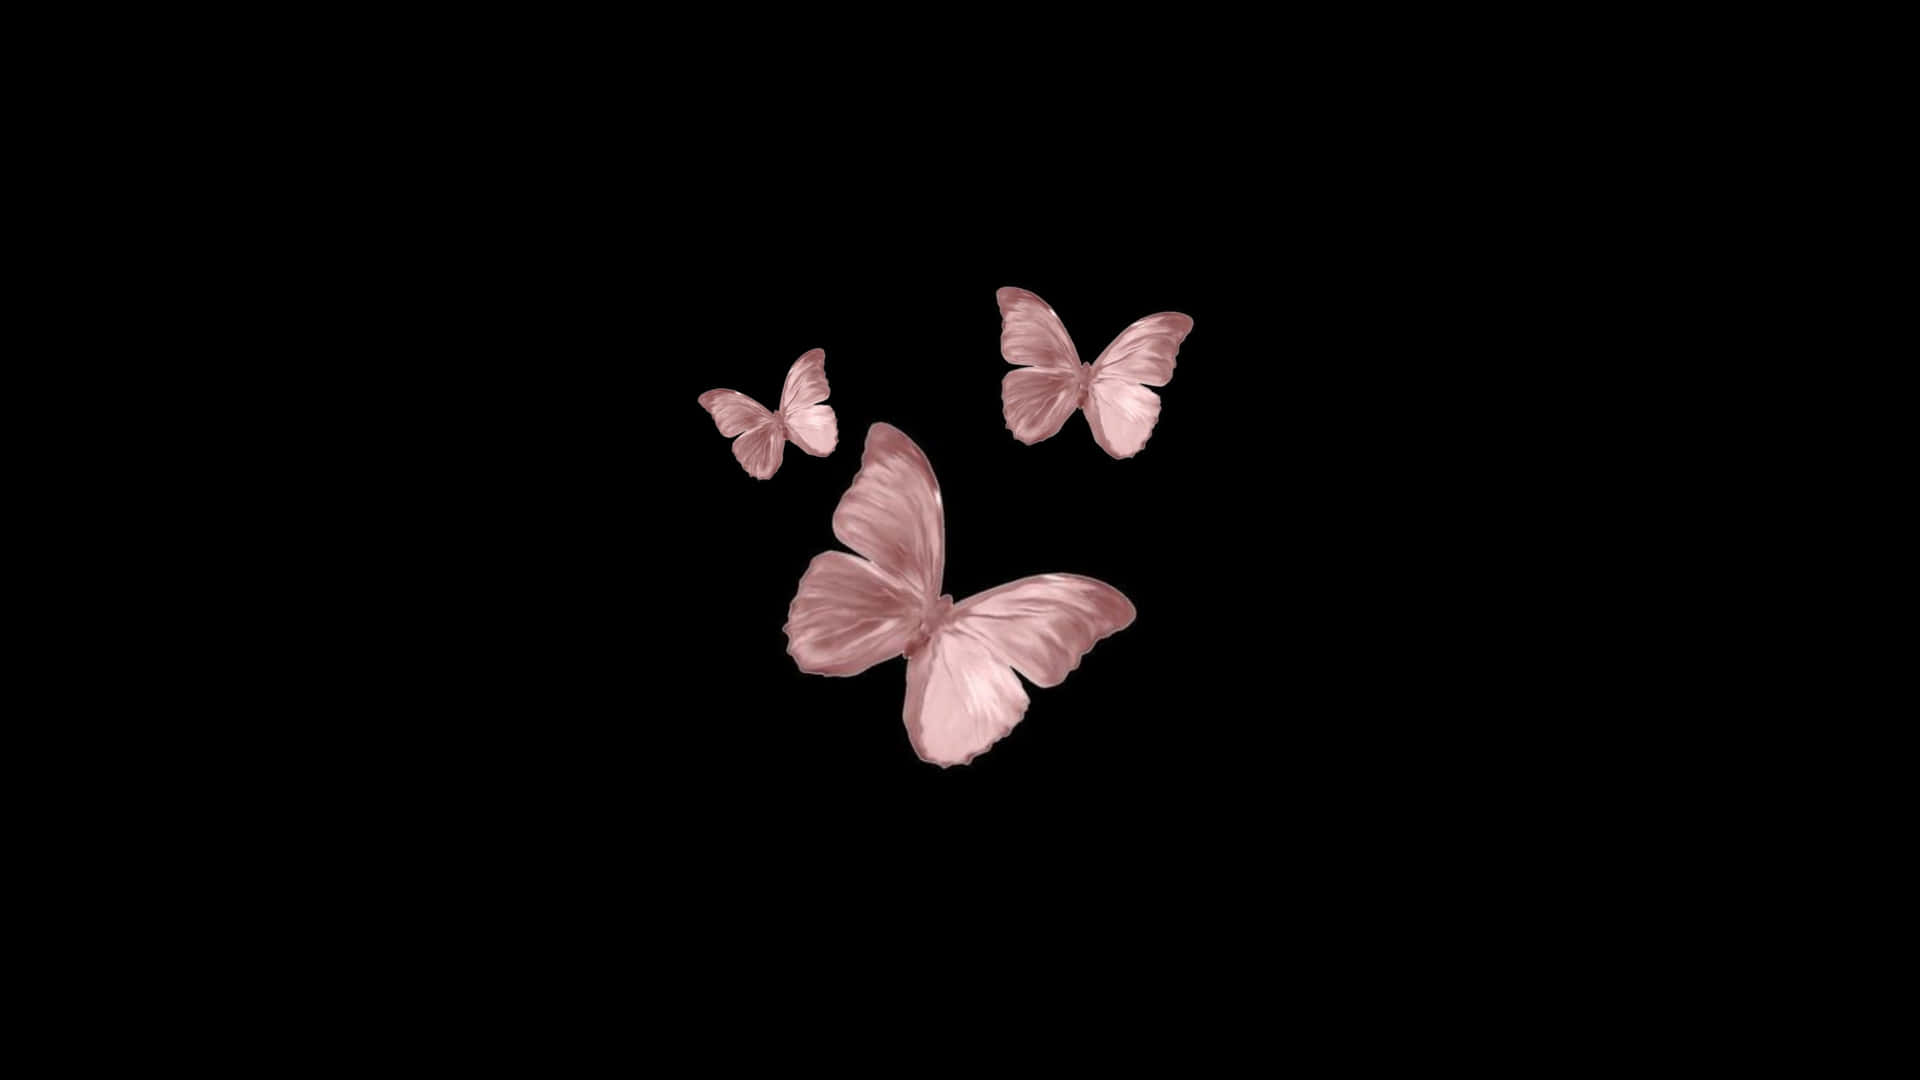 A Black Background With Pink Butterflies Flying In The Air Wallpaper